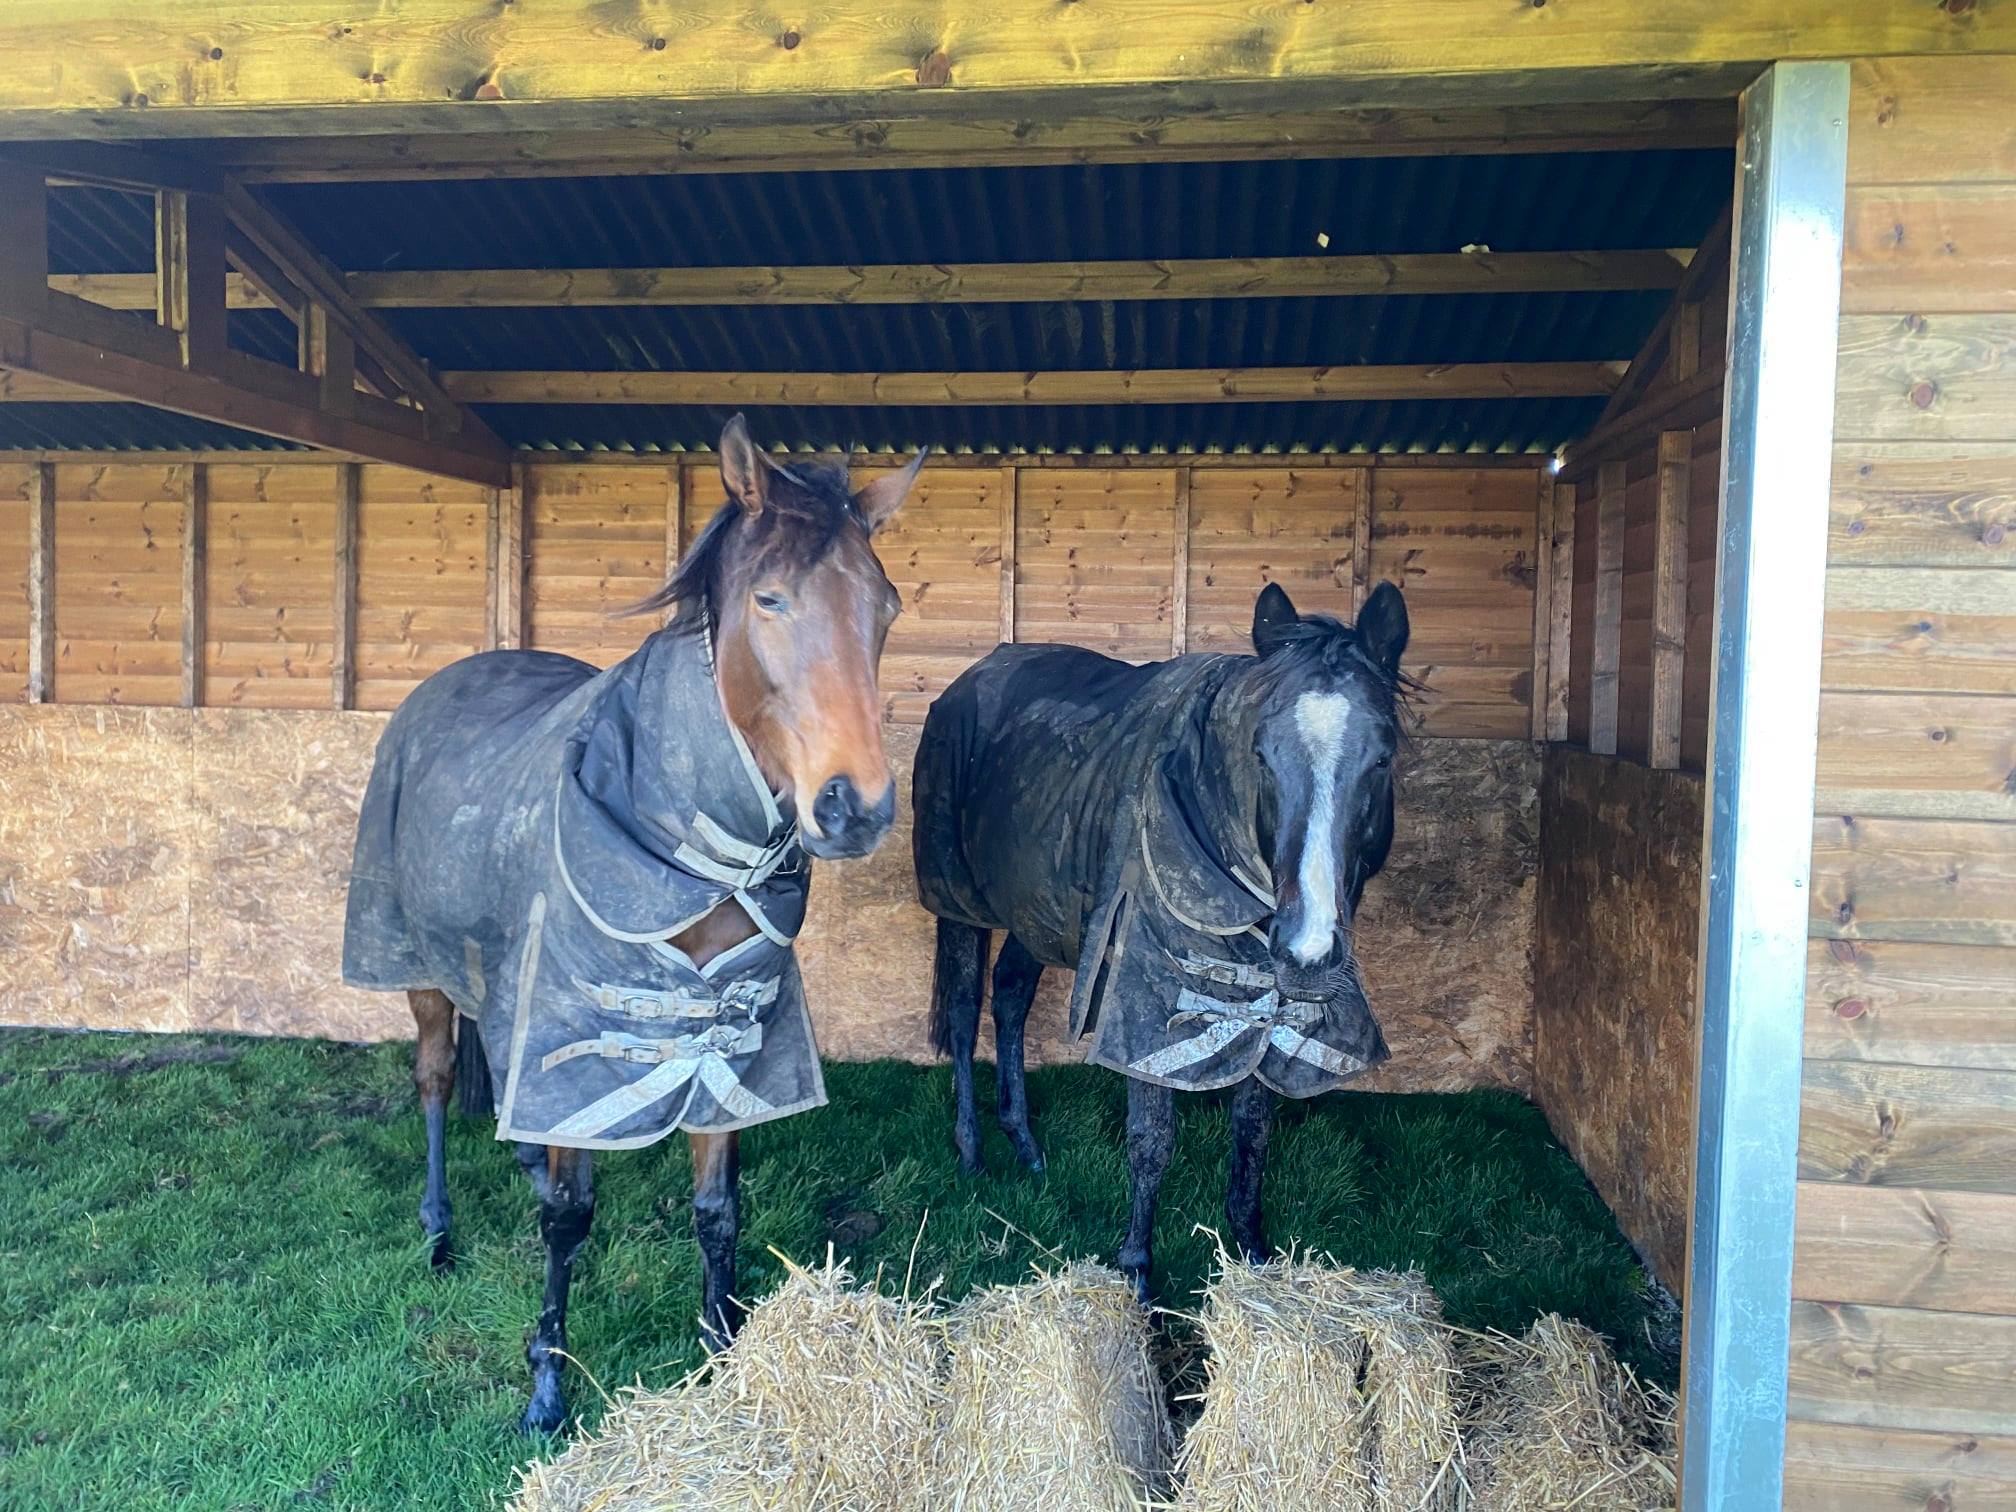 Well the mares have sorted out their ‘bubble’